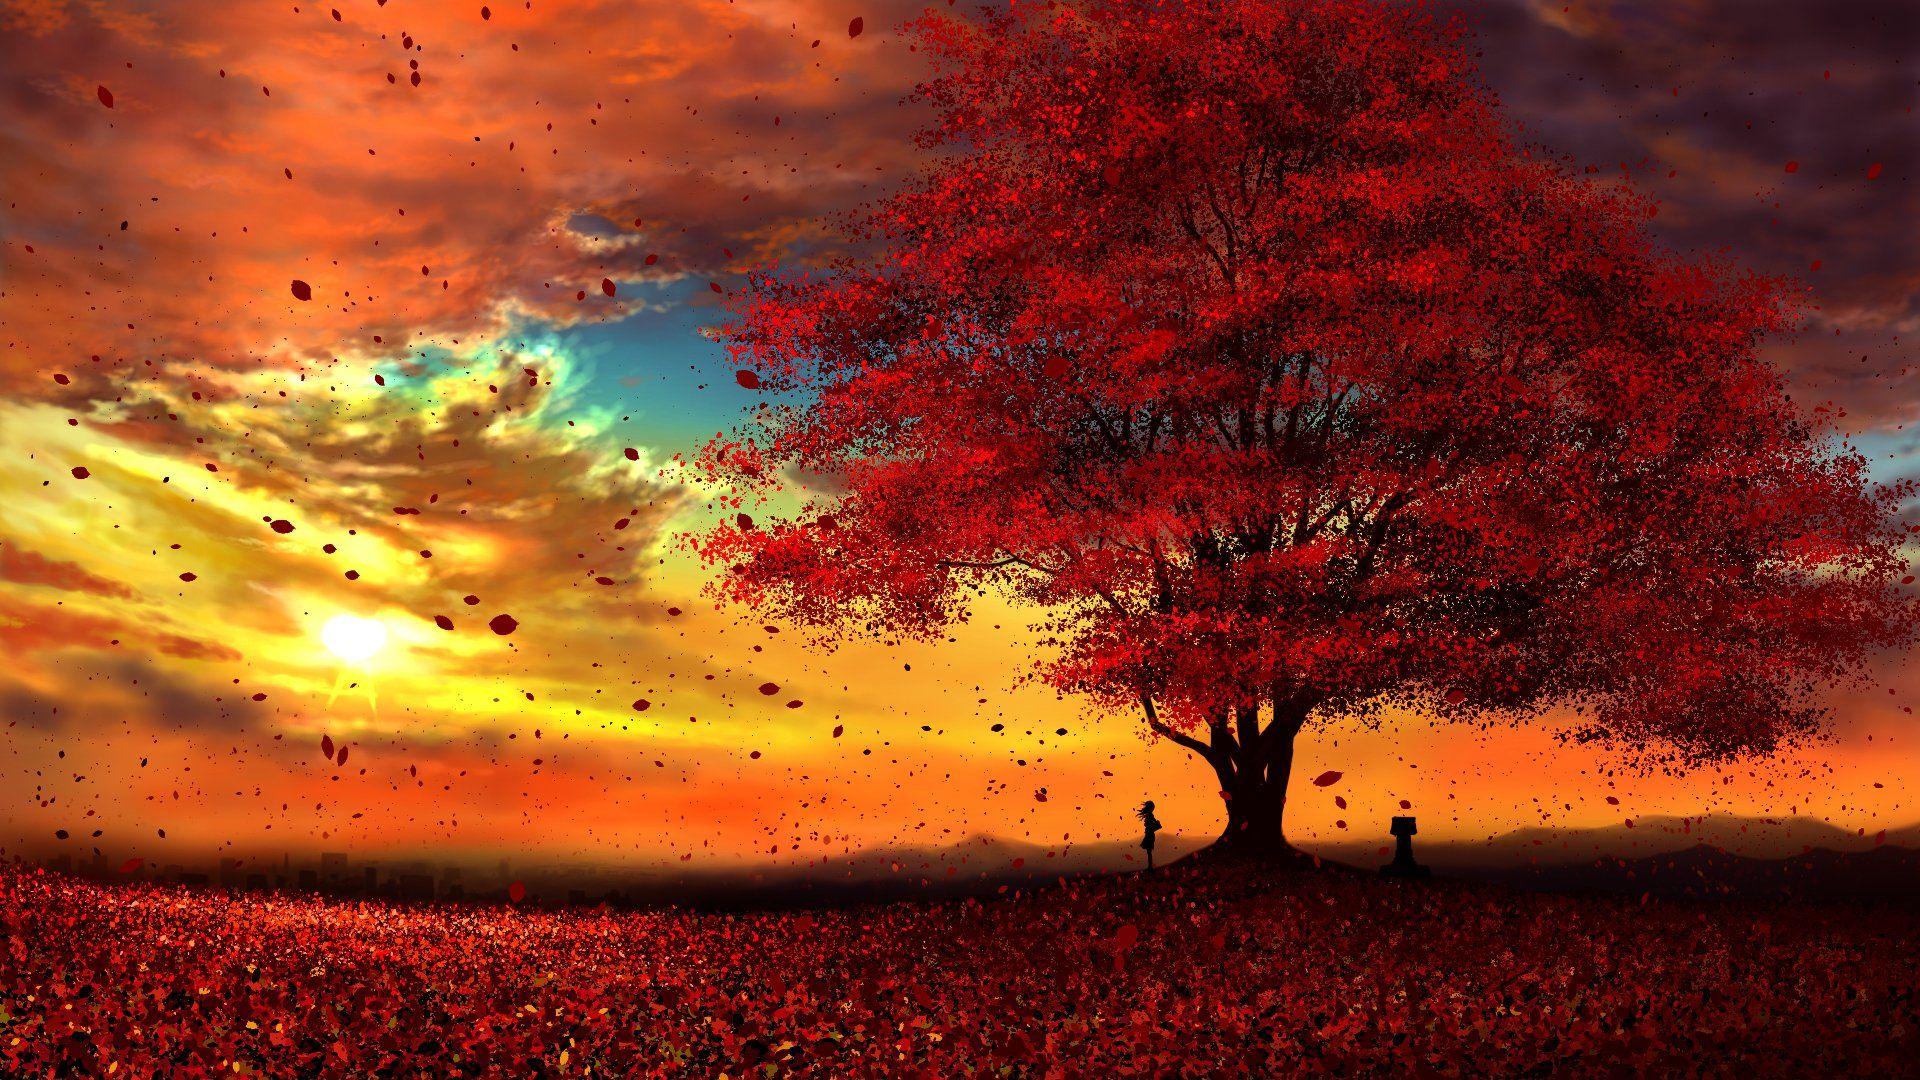 Red Tree in Autumn Forest